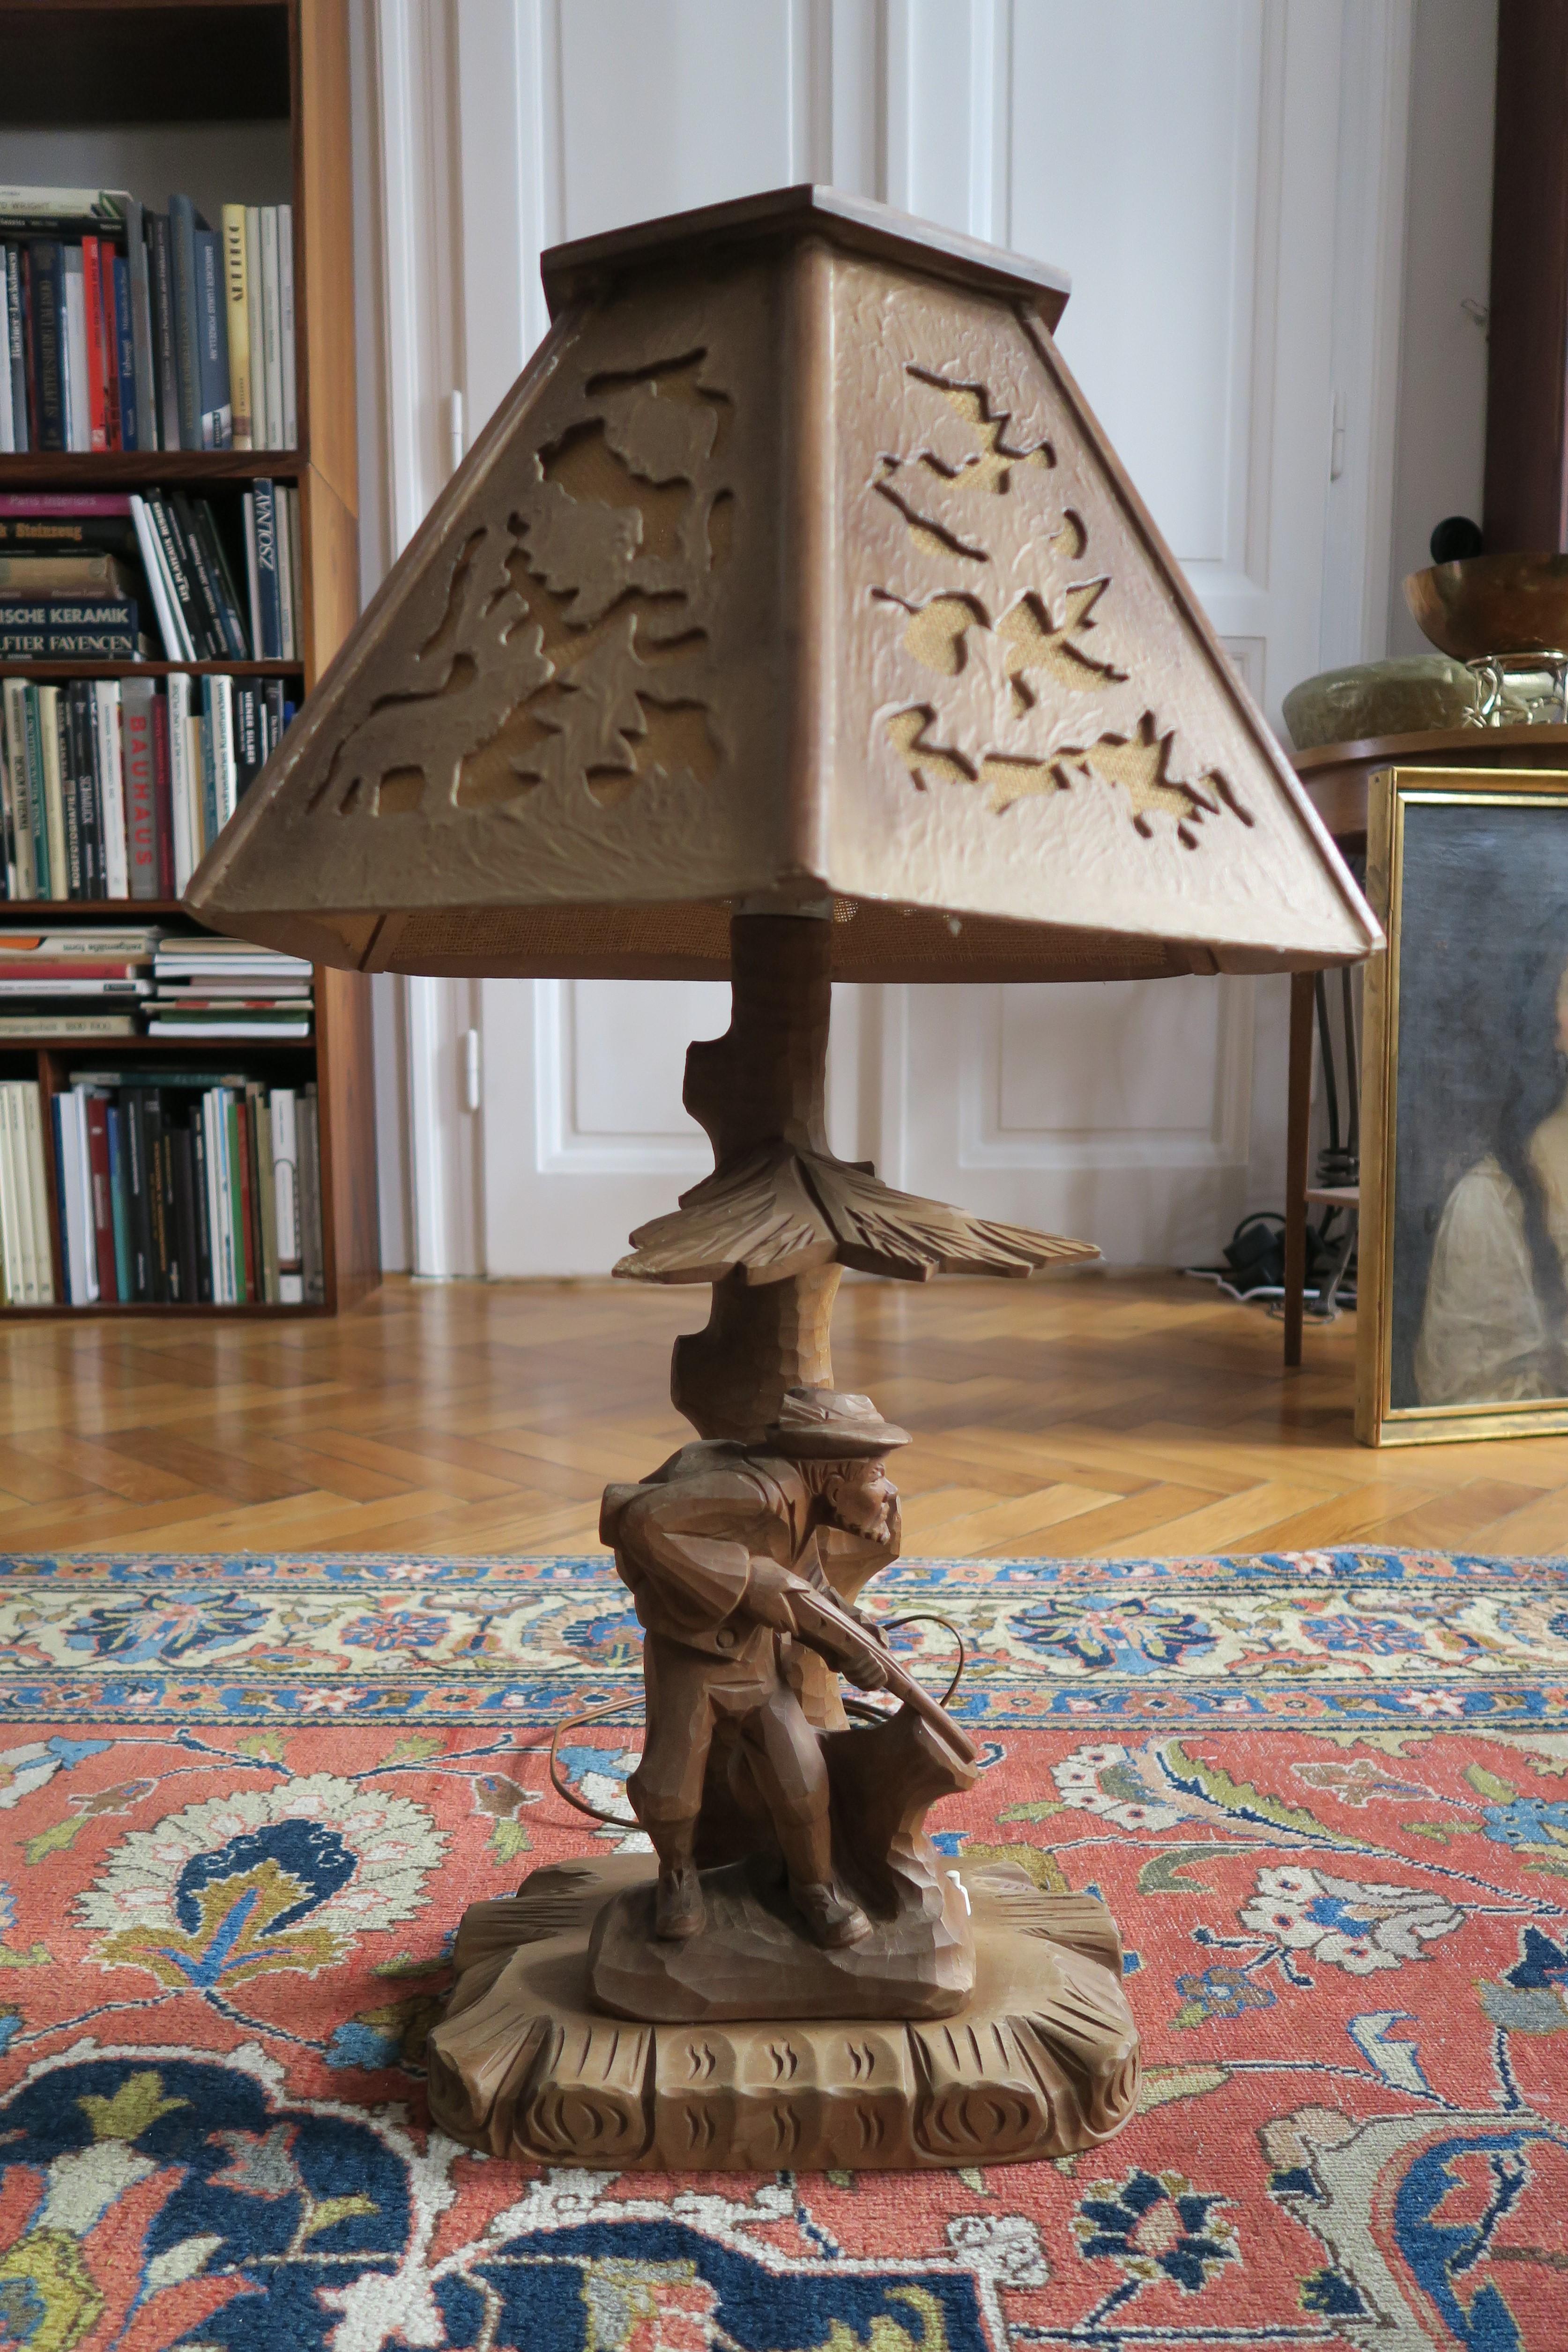 The item for sale is an original desk lamp in the style of Black Forest or possibly Swiss artisanal craftsmanship. Foot and lampshade are both hand carved from medium-dark wood. The lampshade also sports some abstract cutouts which were stretched